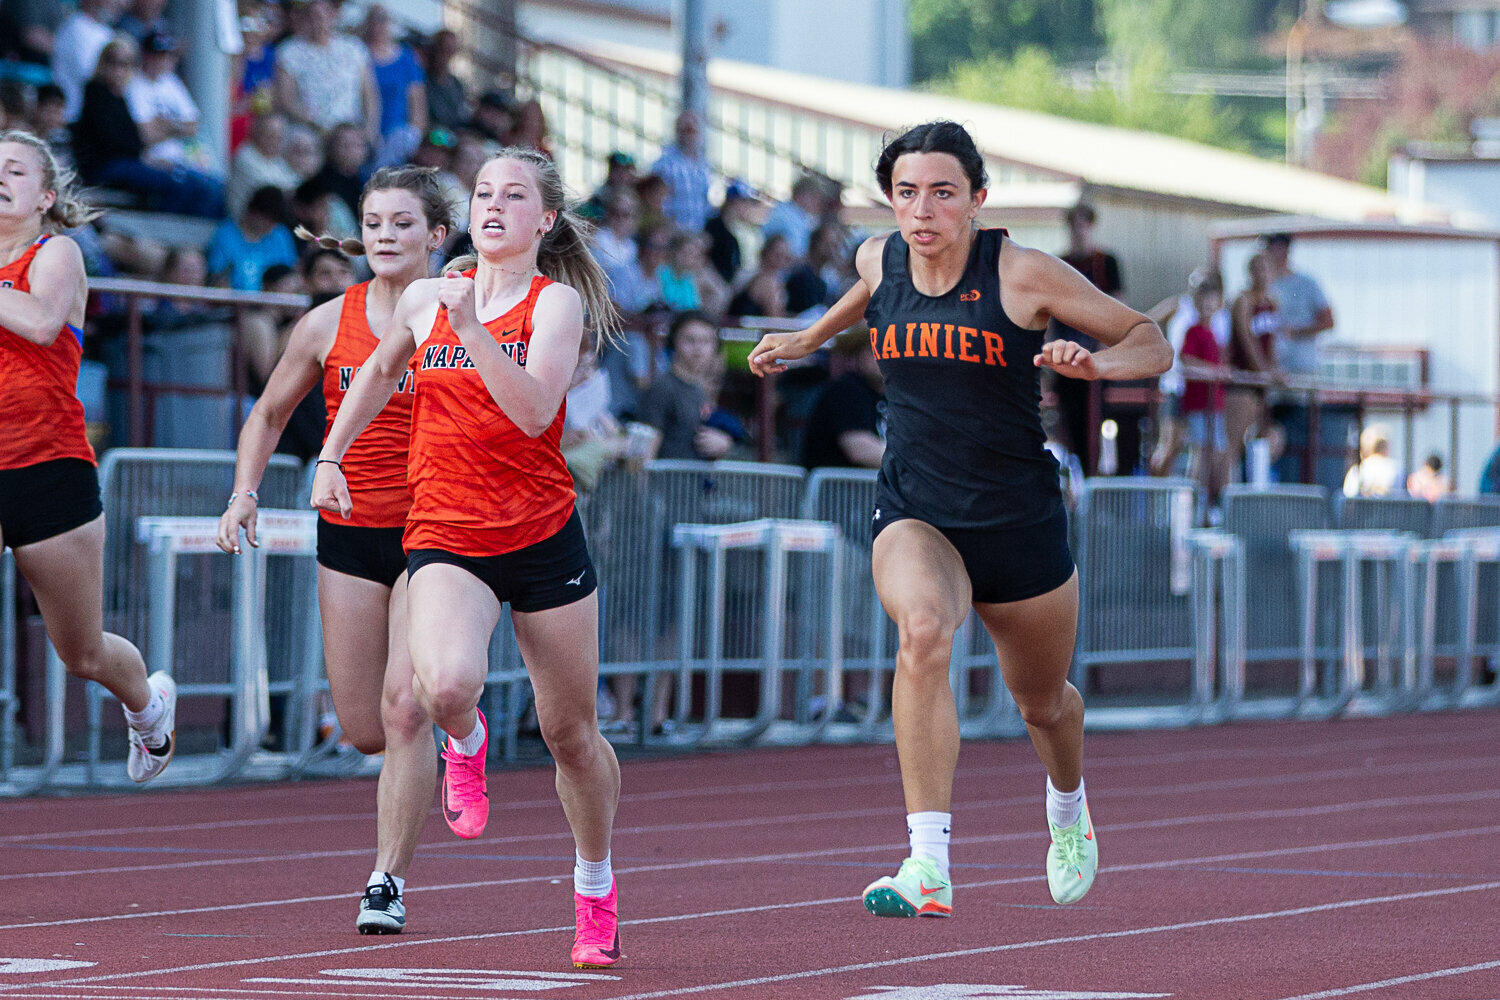 Rainier's Acacia Murphy (right) and Napavine's Morgan Hamilton are neck and neck at the finish line of the 100-meter dash May 19 at W.F. West in the 2B District 4 Championships.